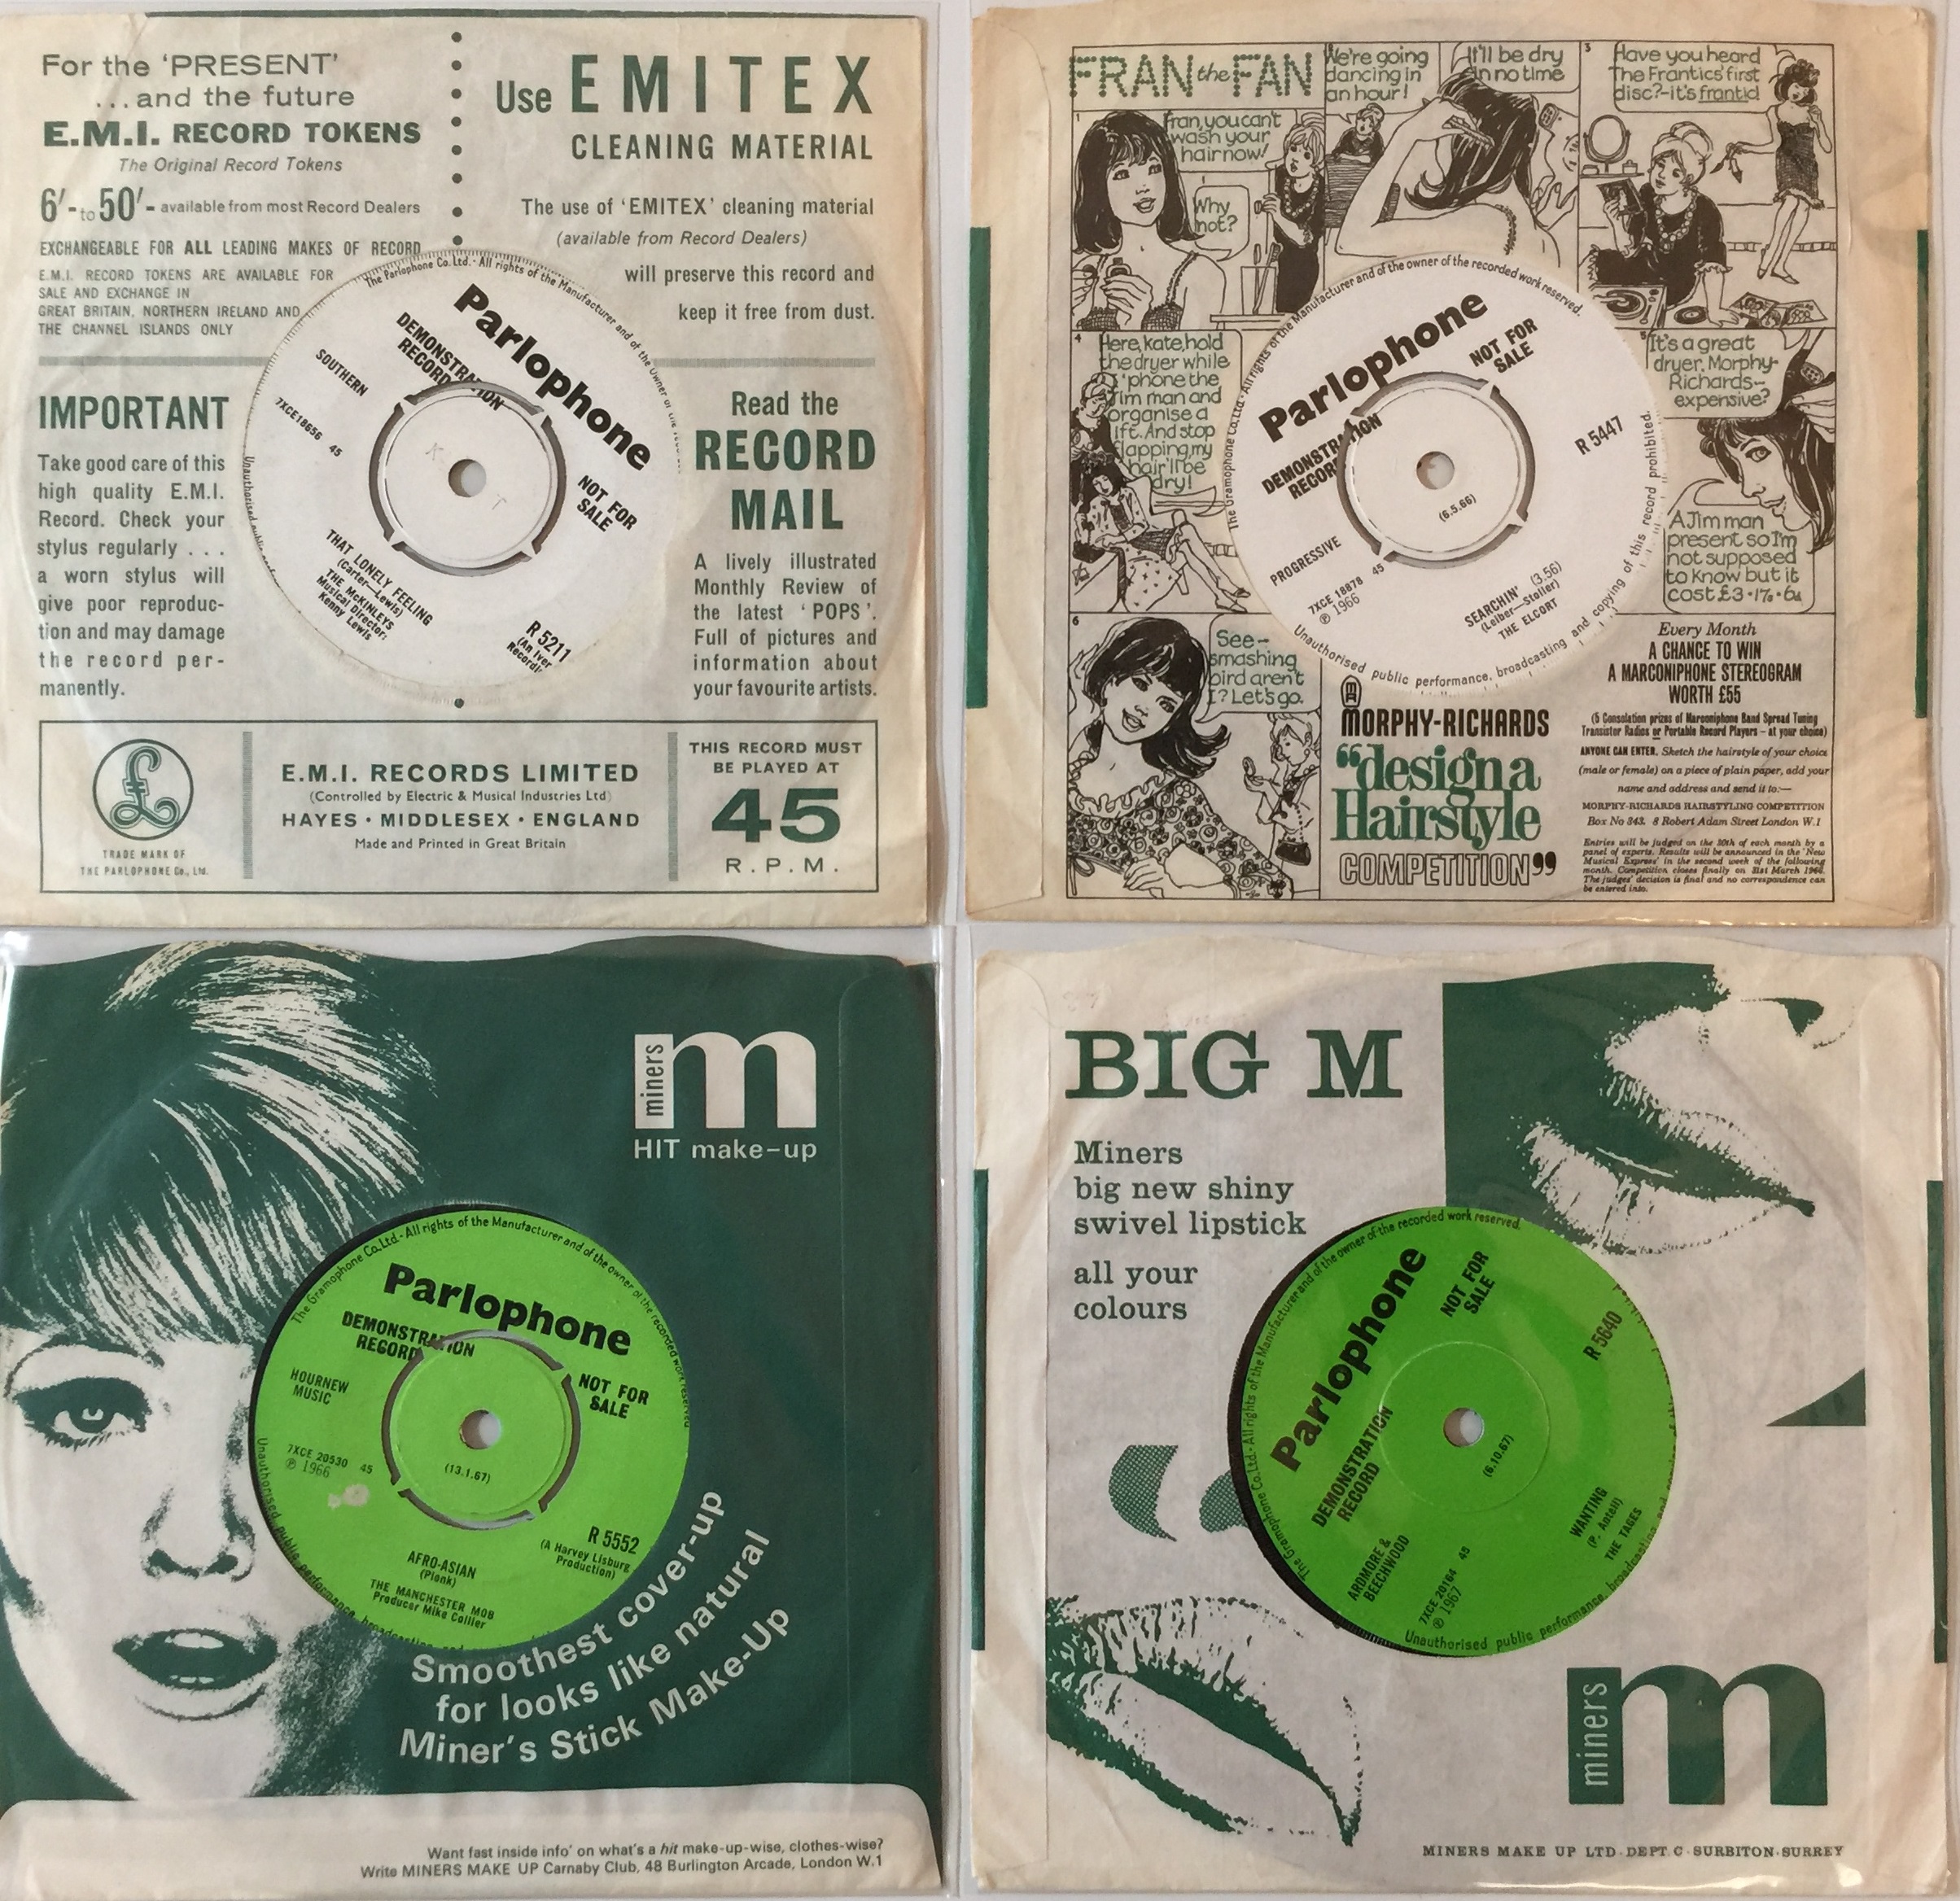 PARLOPHONE 7" COLLECTION - 60s BEAT DEMOS. Wicked selection of 4 x original UK Parlophone 7" demos. - Image 2 of 2